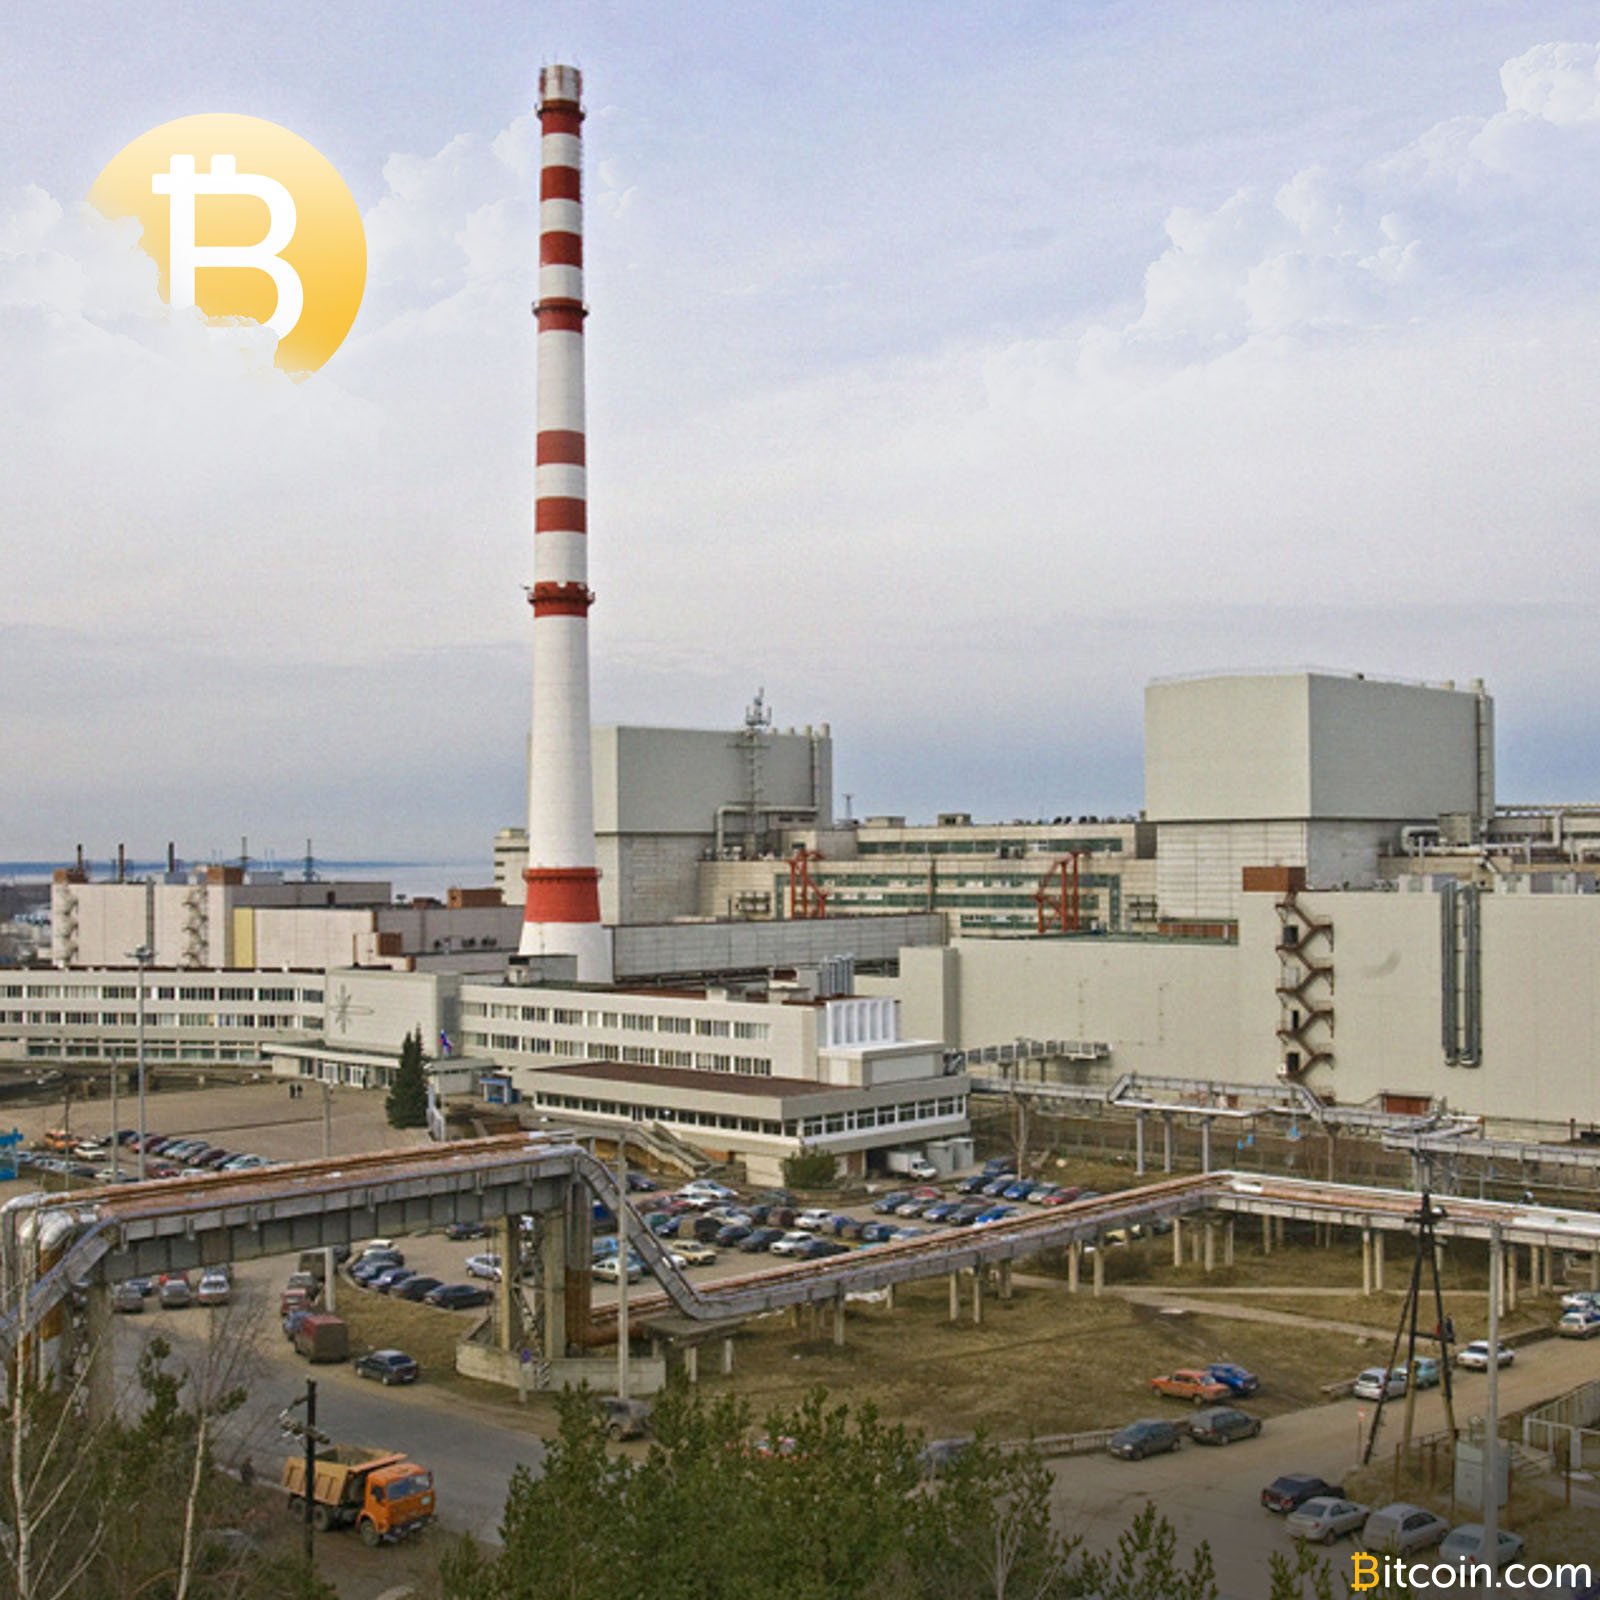 Russian Governor Invites Cryptocurrency Miners to Set Up Mining Farms in Leningrad